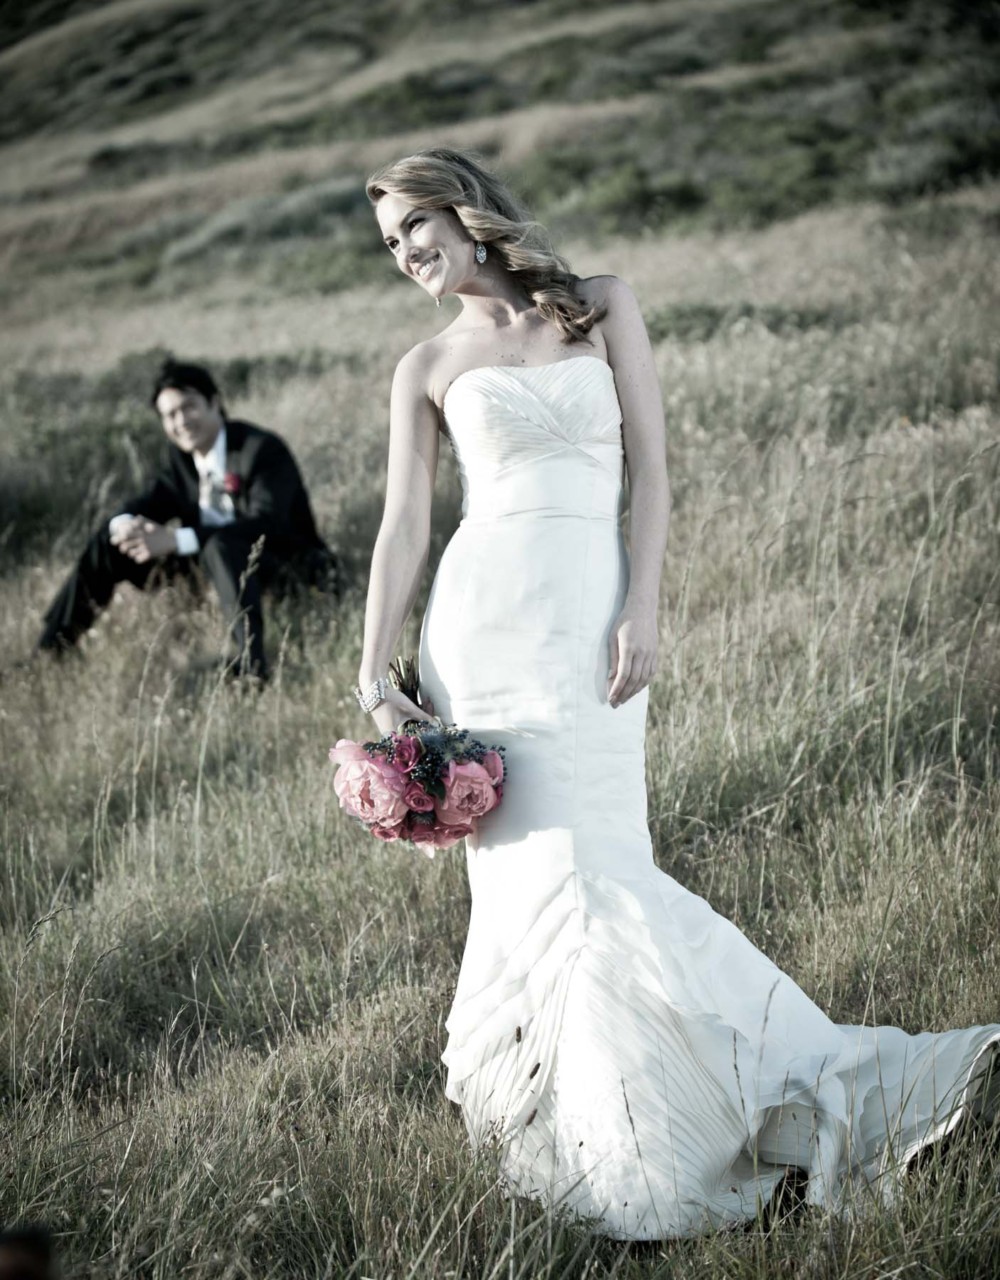 Looking for a local wedding photographer in Wasilla?